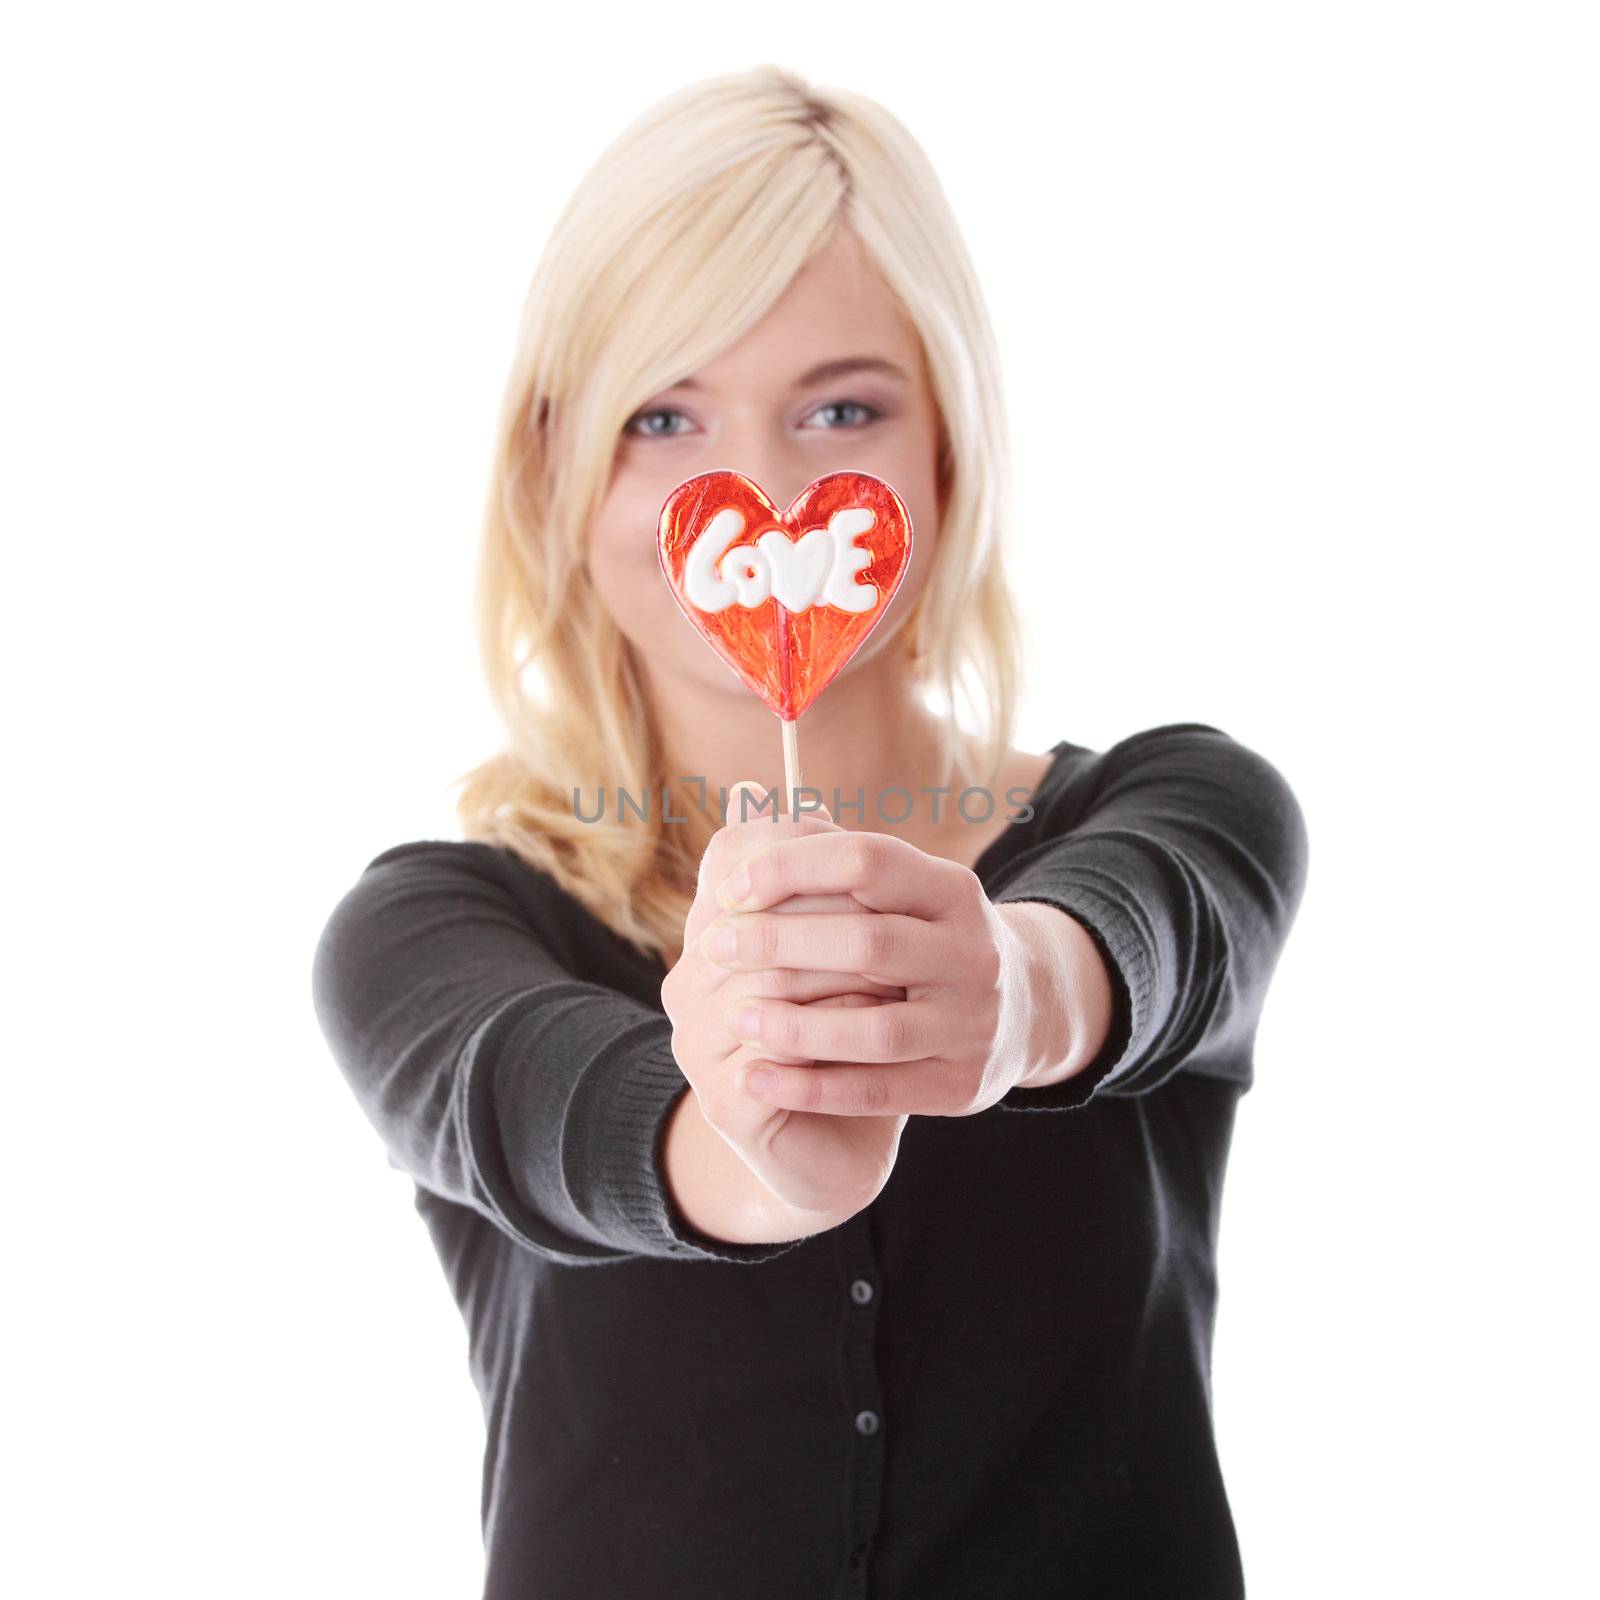 Teenage girl holding red heart shaped lollipop by BDS